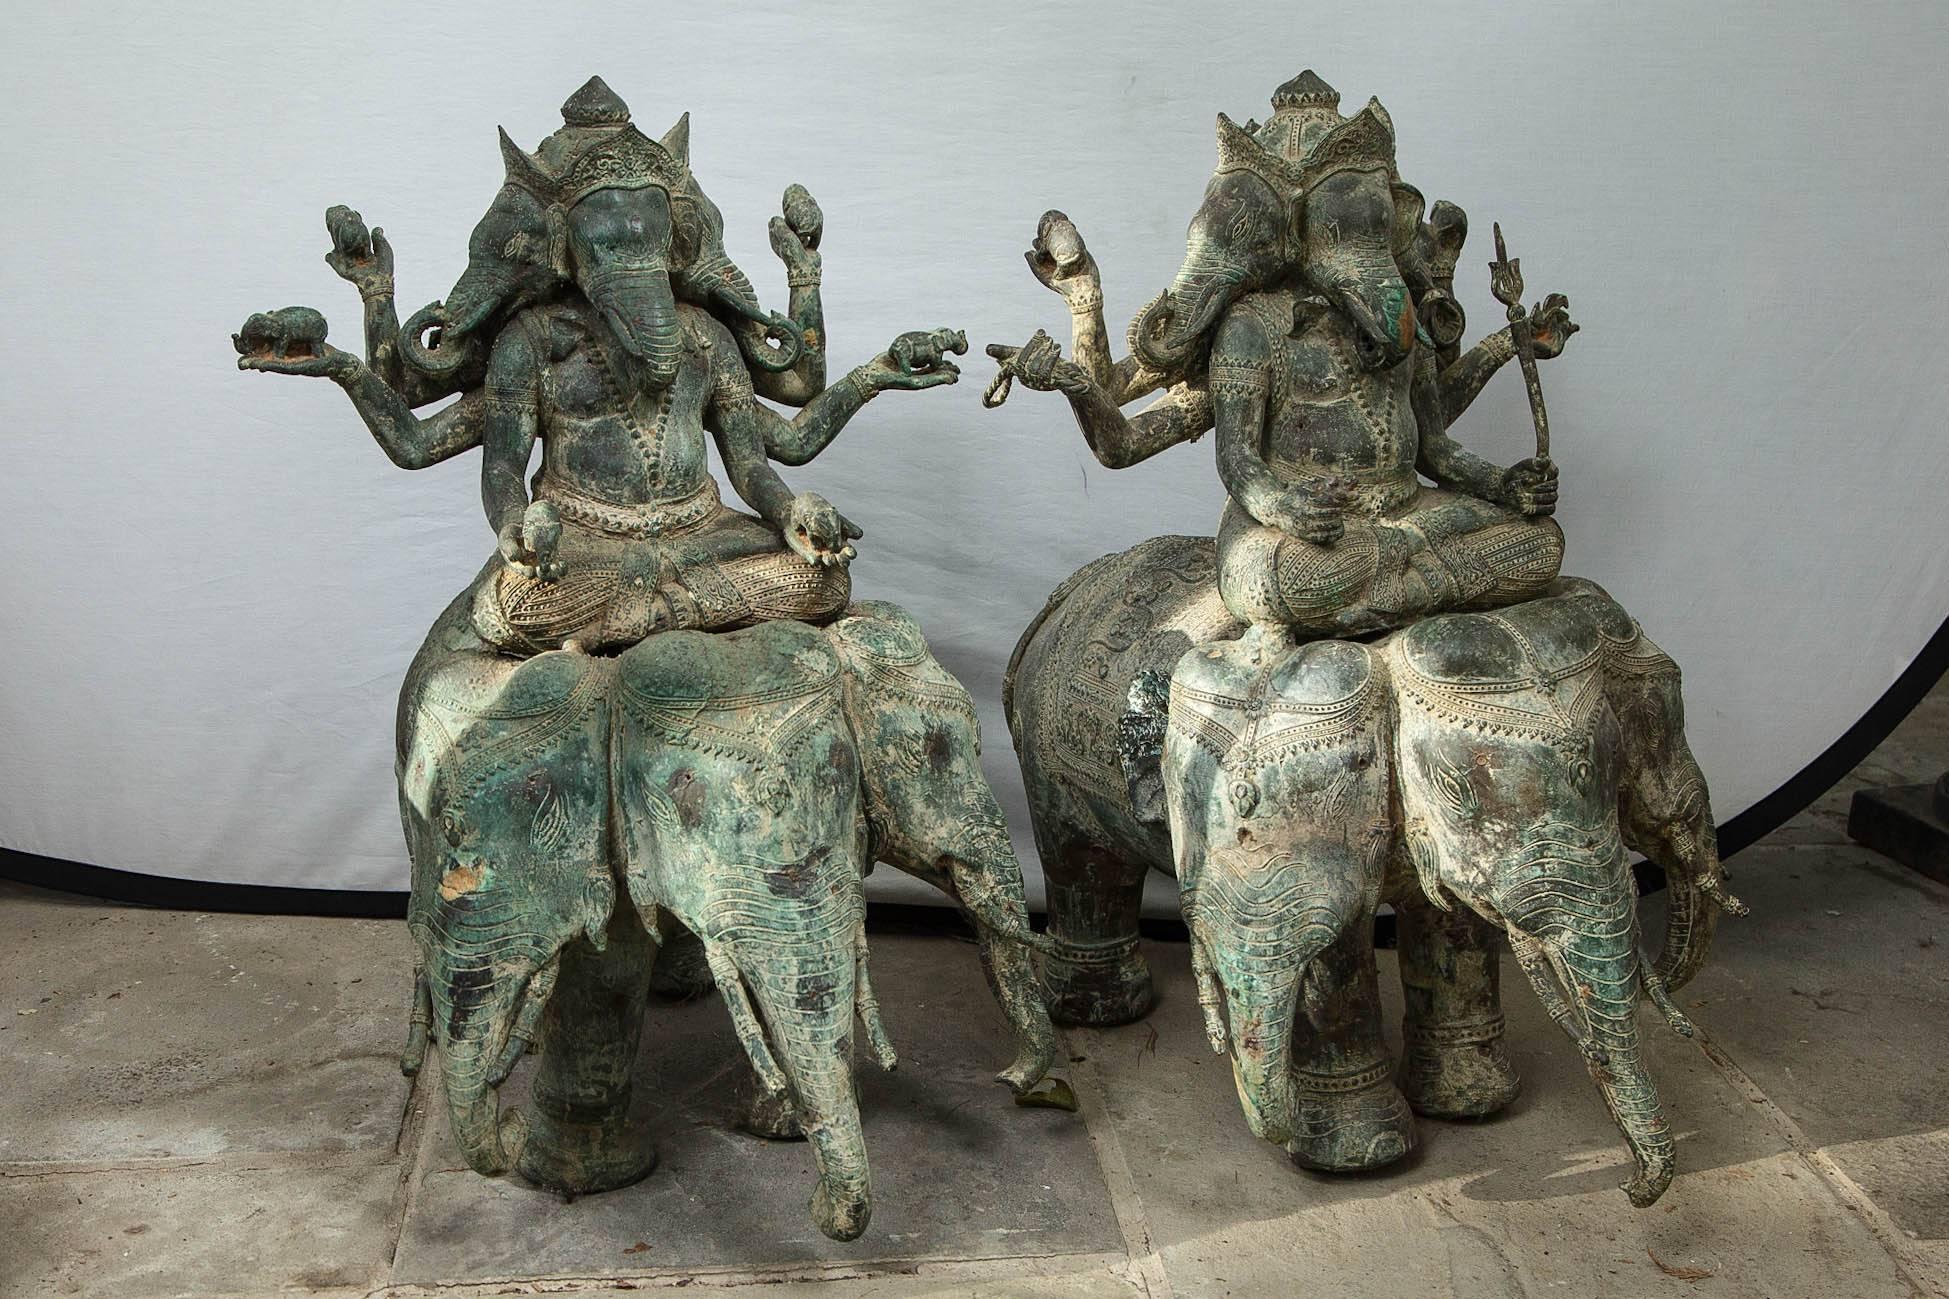 Three elephant heads on the body of each and being ridden by gods each with three elephant heads. Human arms holding symbols of his powers.

 